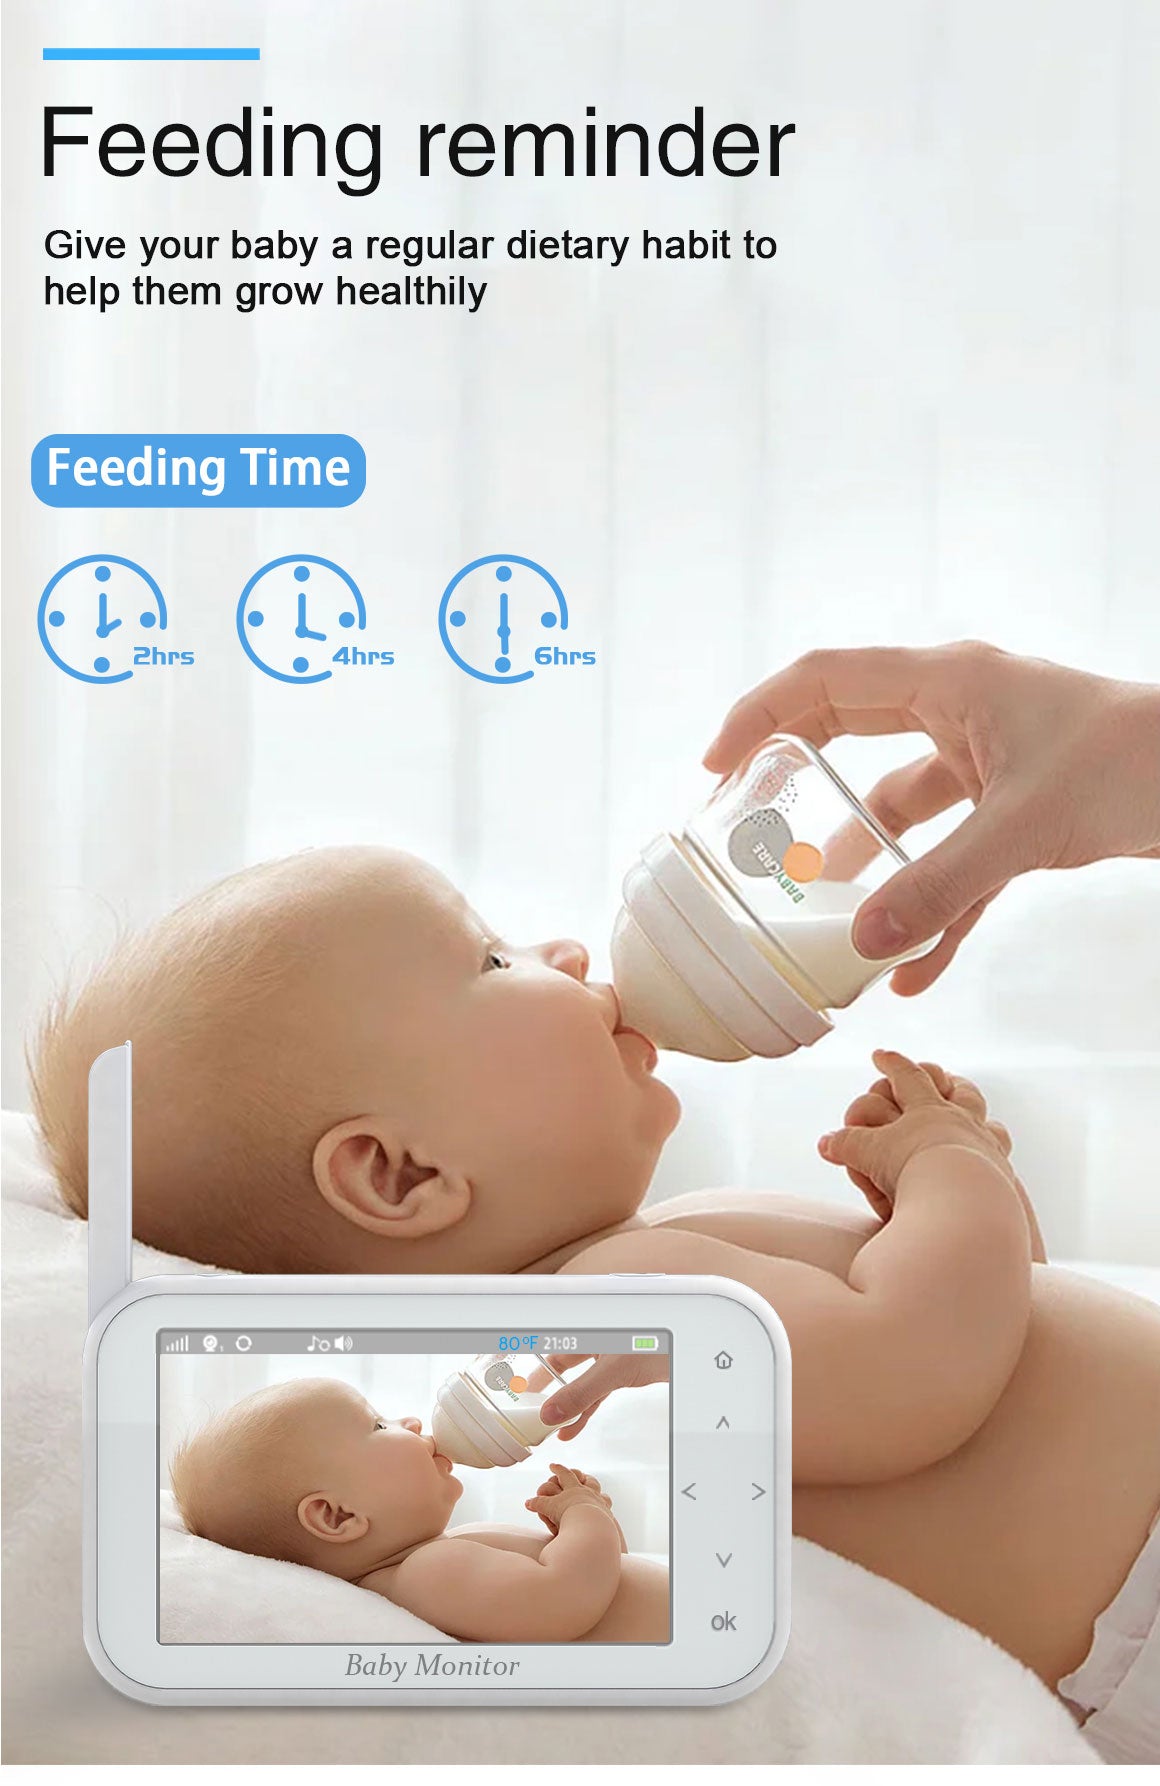 Remote Pan-Tilt Video Baby Monitor, 4.5" LCD Screen, Up to 12 Hrs Video Streaming,  Night Vision, Soothing Sounds, 2-Way Talk, Temperature Sensor